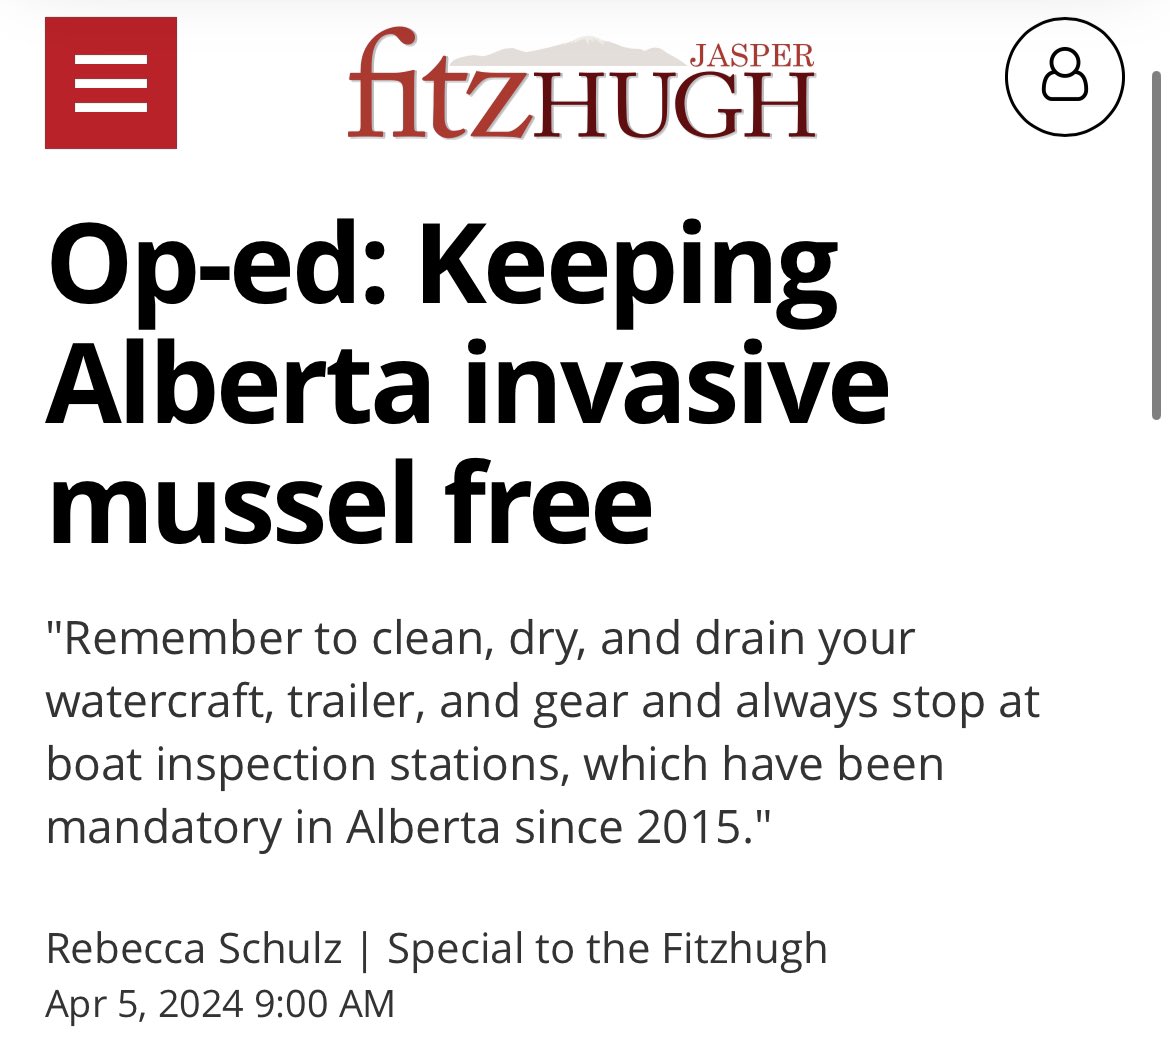 Zebra mussels are one of the world’s most invasive aquatic species. An infestation can cause millions in damages to water infrastructure. This is why we are taking proactive action to keep Alberta invasive mussel free now and long into the future. Read my full Op-Ed here👇…